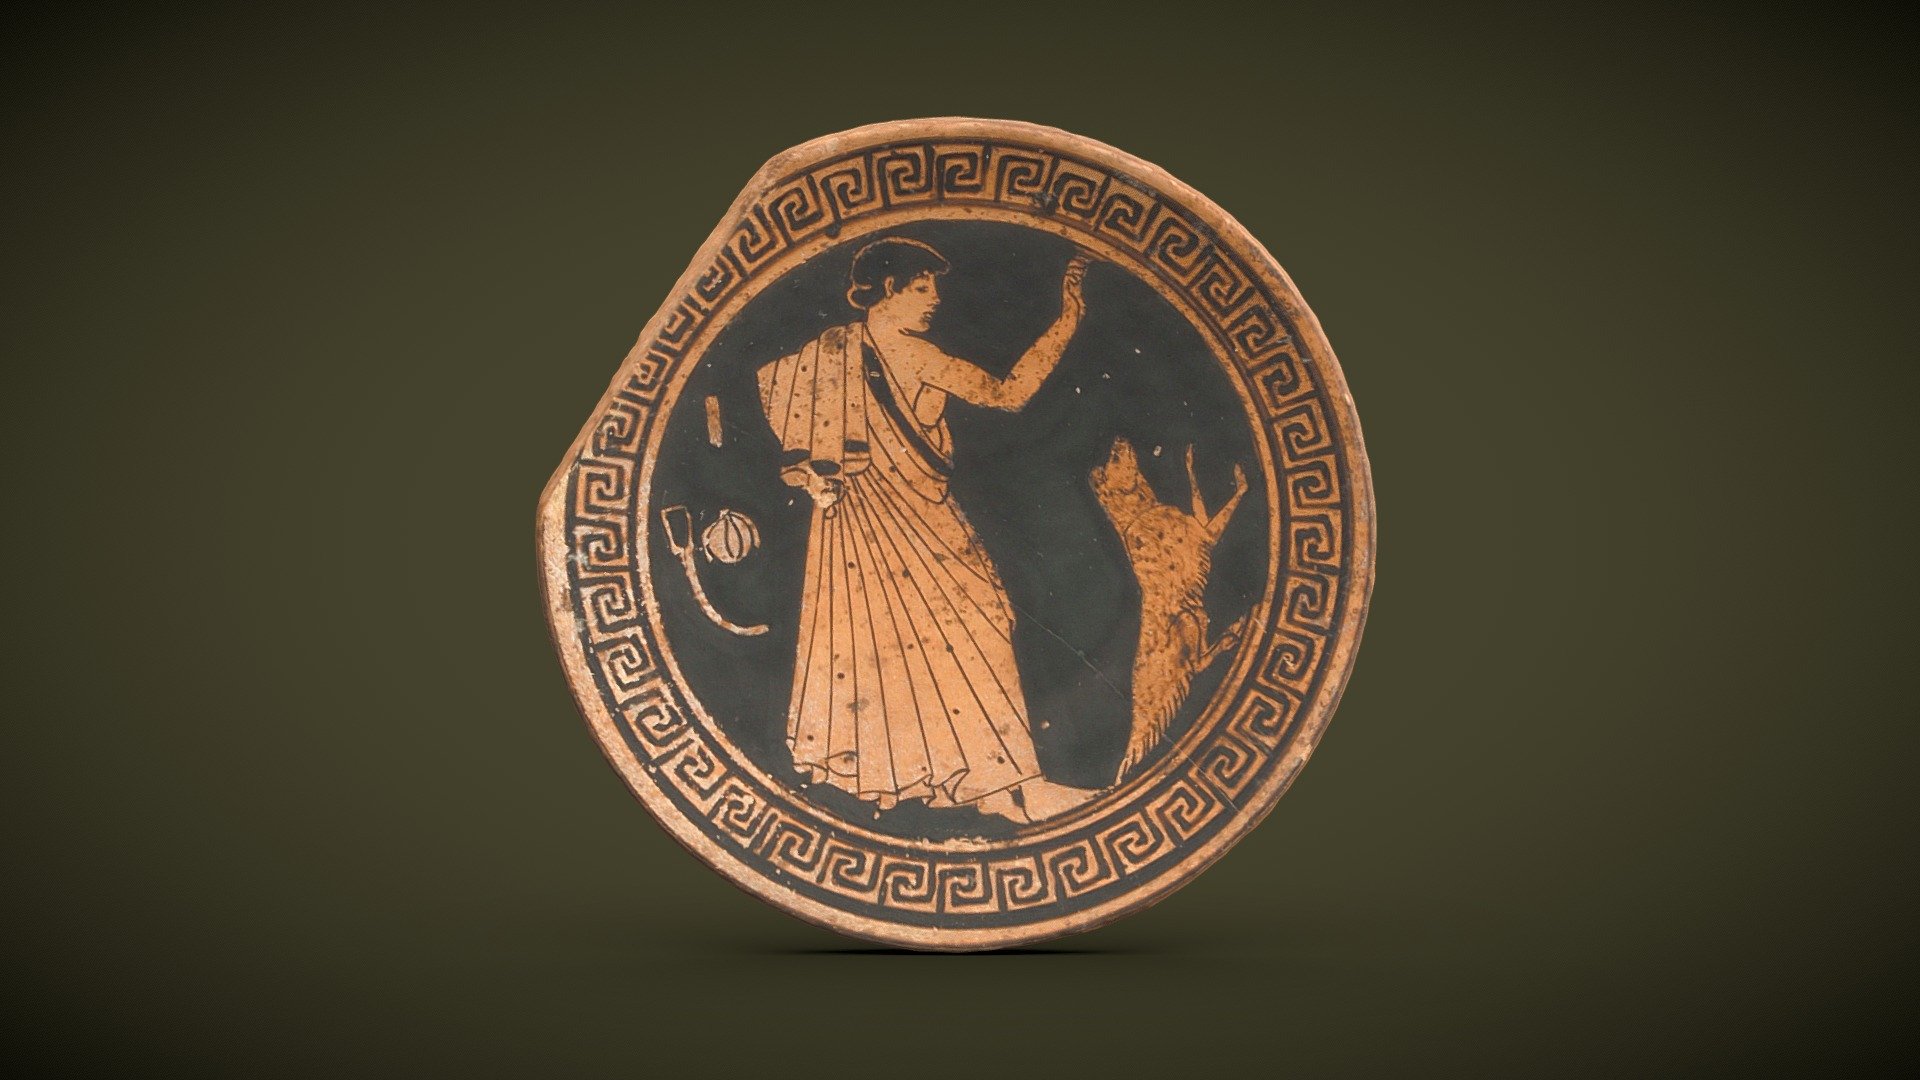 Attic cup tondo. Flat interior circle of the base of the cup

480 BC
Athens, Greece
Painter of Brygos
Ceramic
Inv.R 350

This boy is playing with his dog. This is a common scene in Ancient Greece, many children had a pet.

Tondo de coupe attique

480 av. J.-C.
Athènes
Peintre de Brygos
Ceramique
Inv.R 350

Ce garçon jouant avec son chien constitue un spectacle courant, beaucoup d'enfants ayant un animal familier 3d model